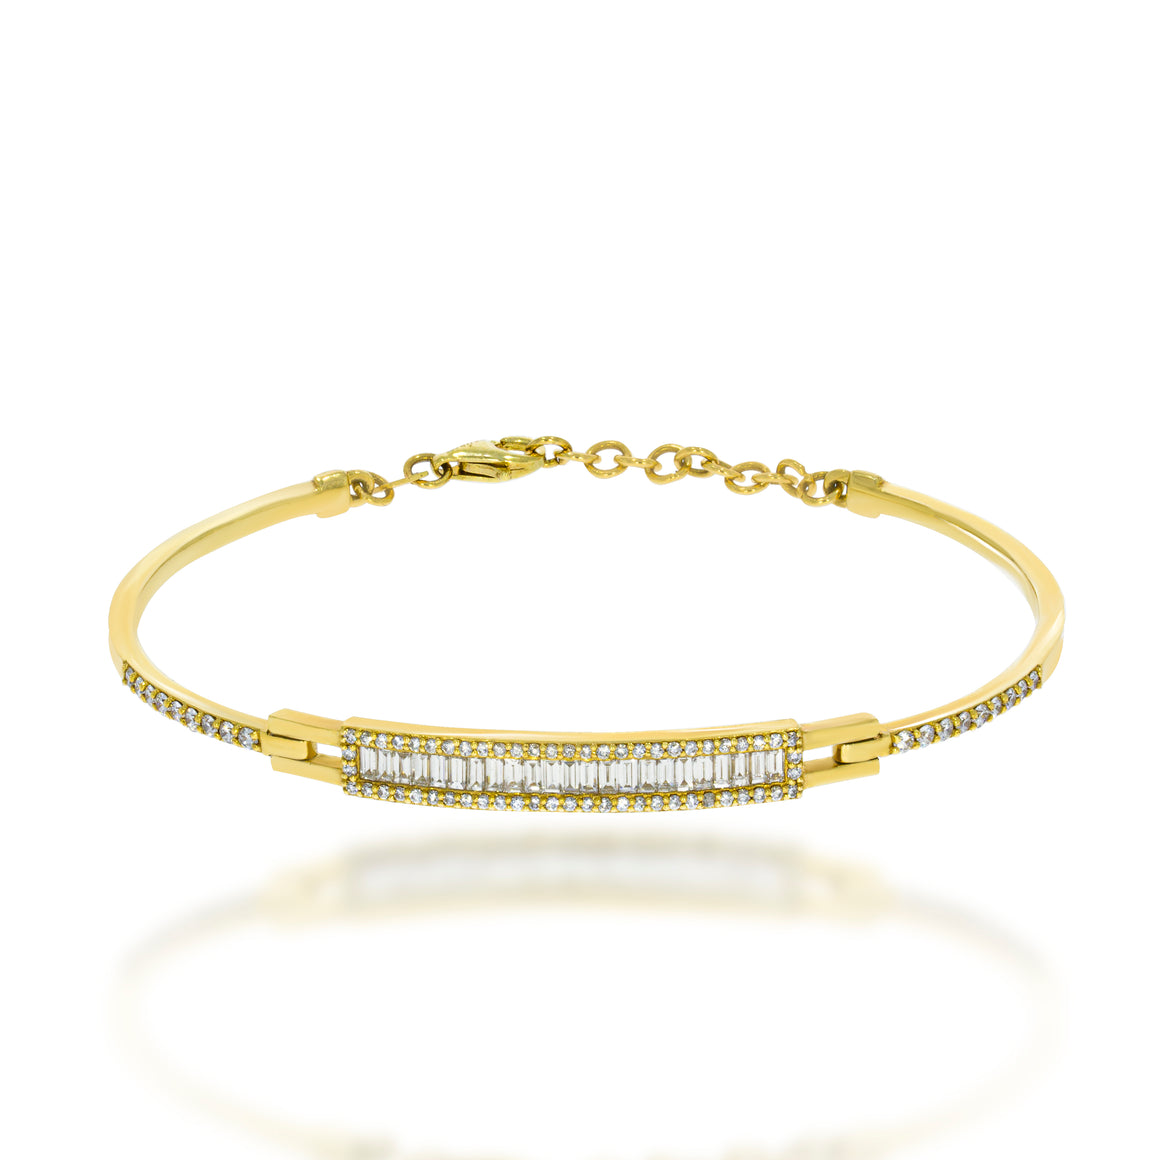 Diamond Bangle Bracelet 14K Yellow Gold rectangular disc studded with round diamonds and filled with 23 Baguette shape diamonds.